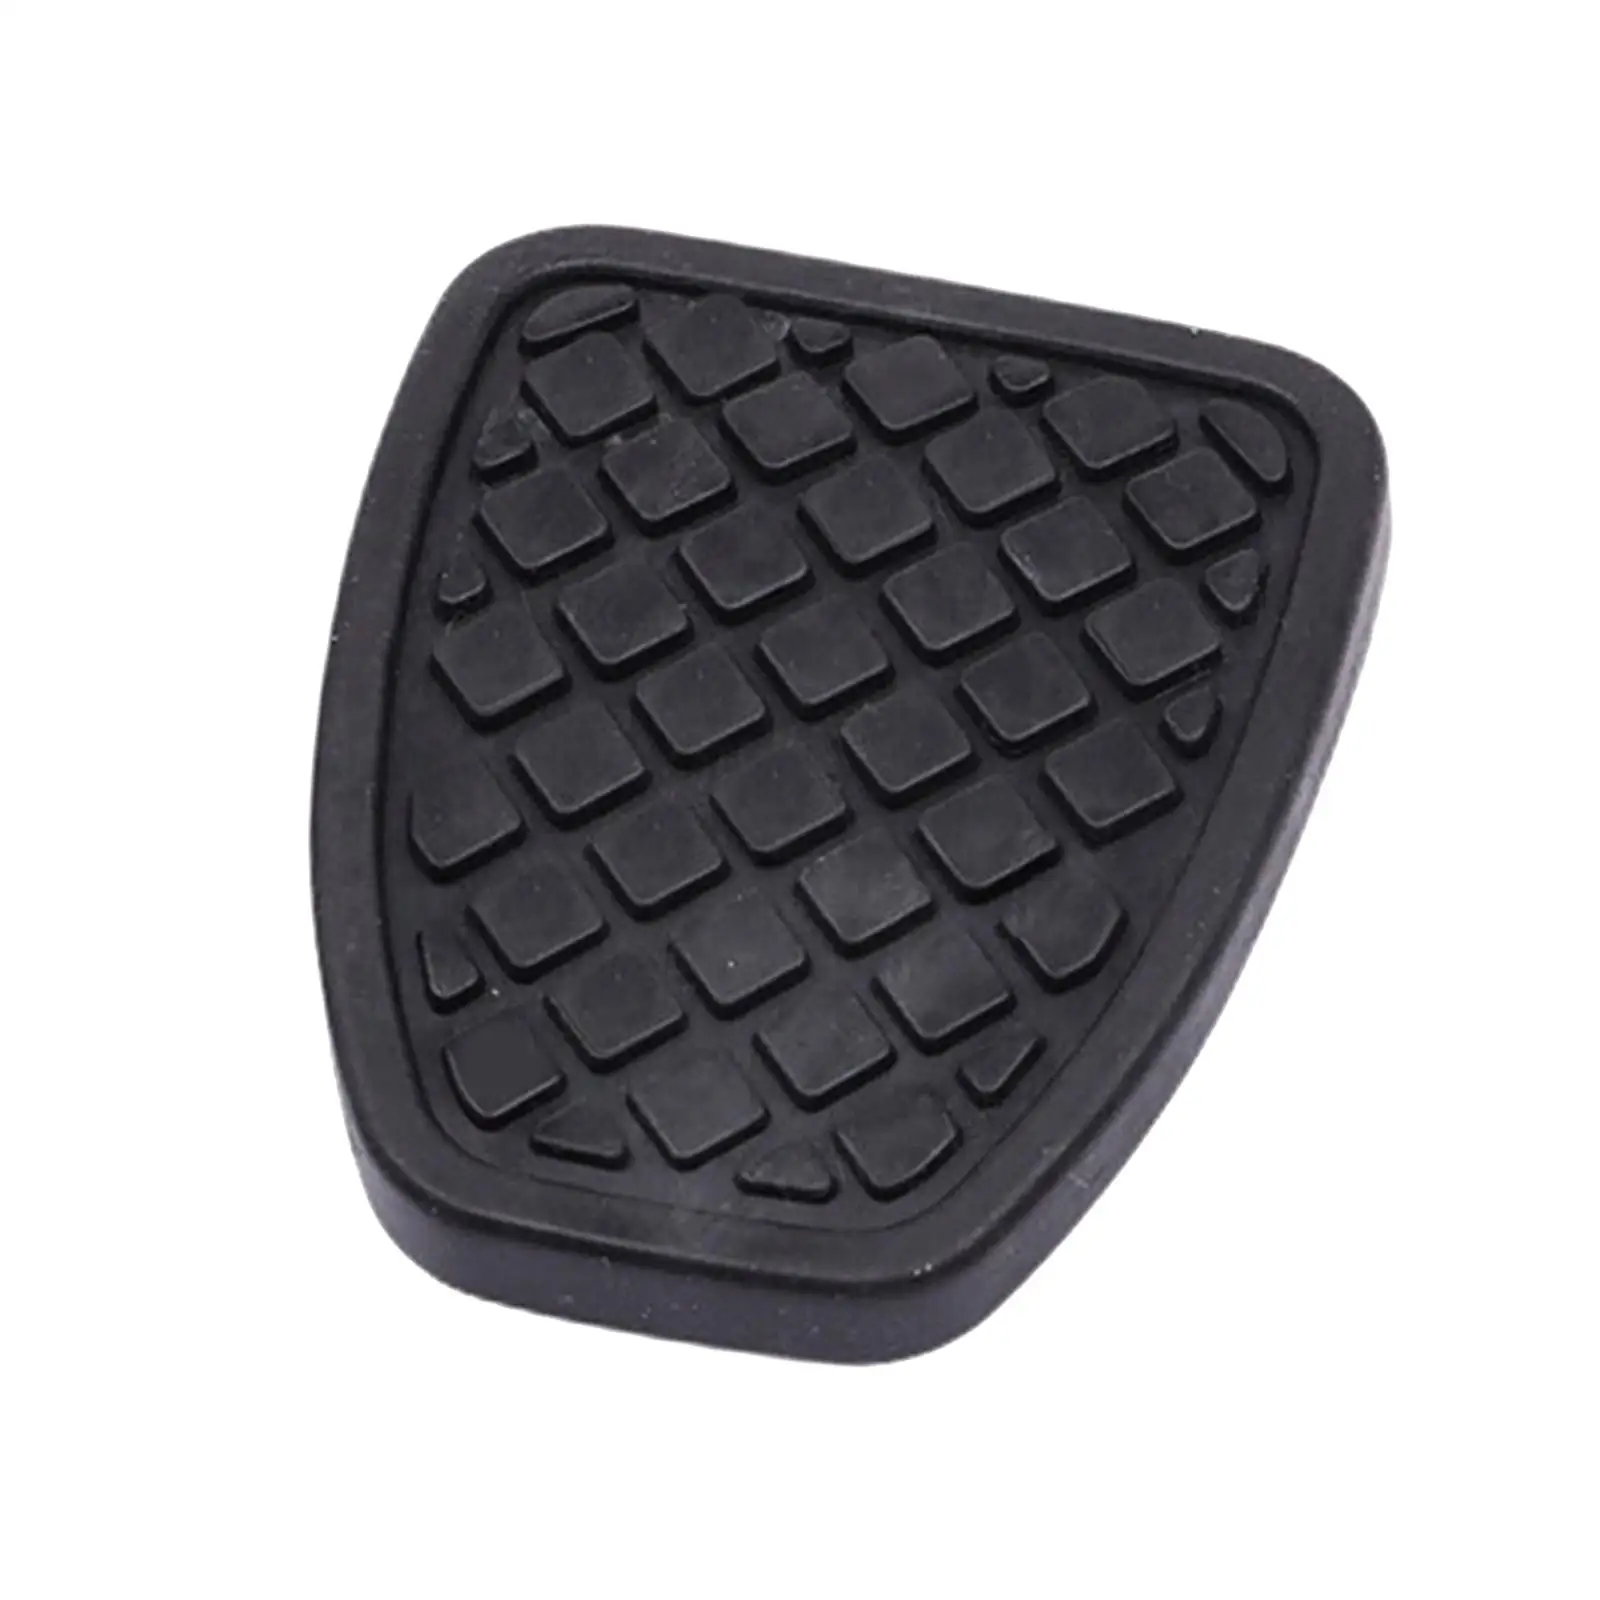 Rubber Brake Clutch Pedal Pad Durable Replacement Parts Auto Accessories 73601-5010 for Subaru Legacy II III IV V Impreza